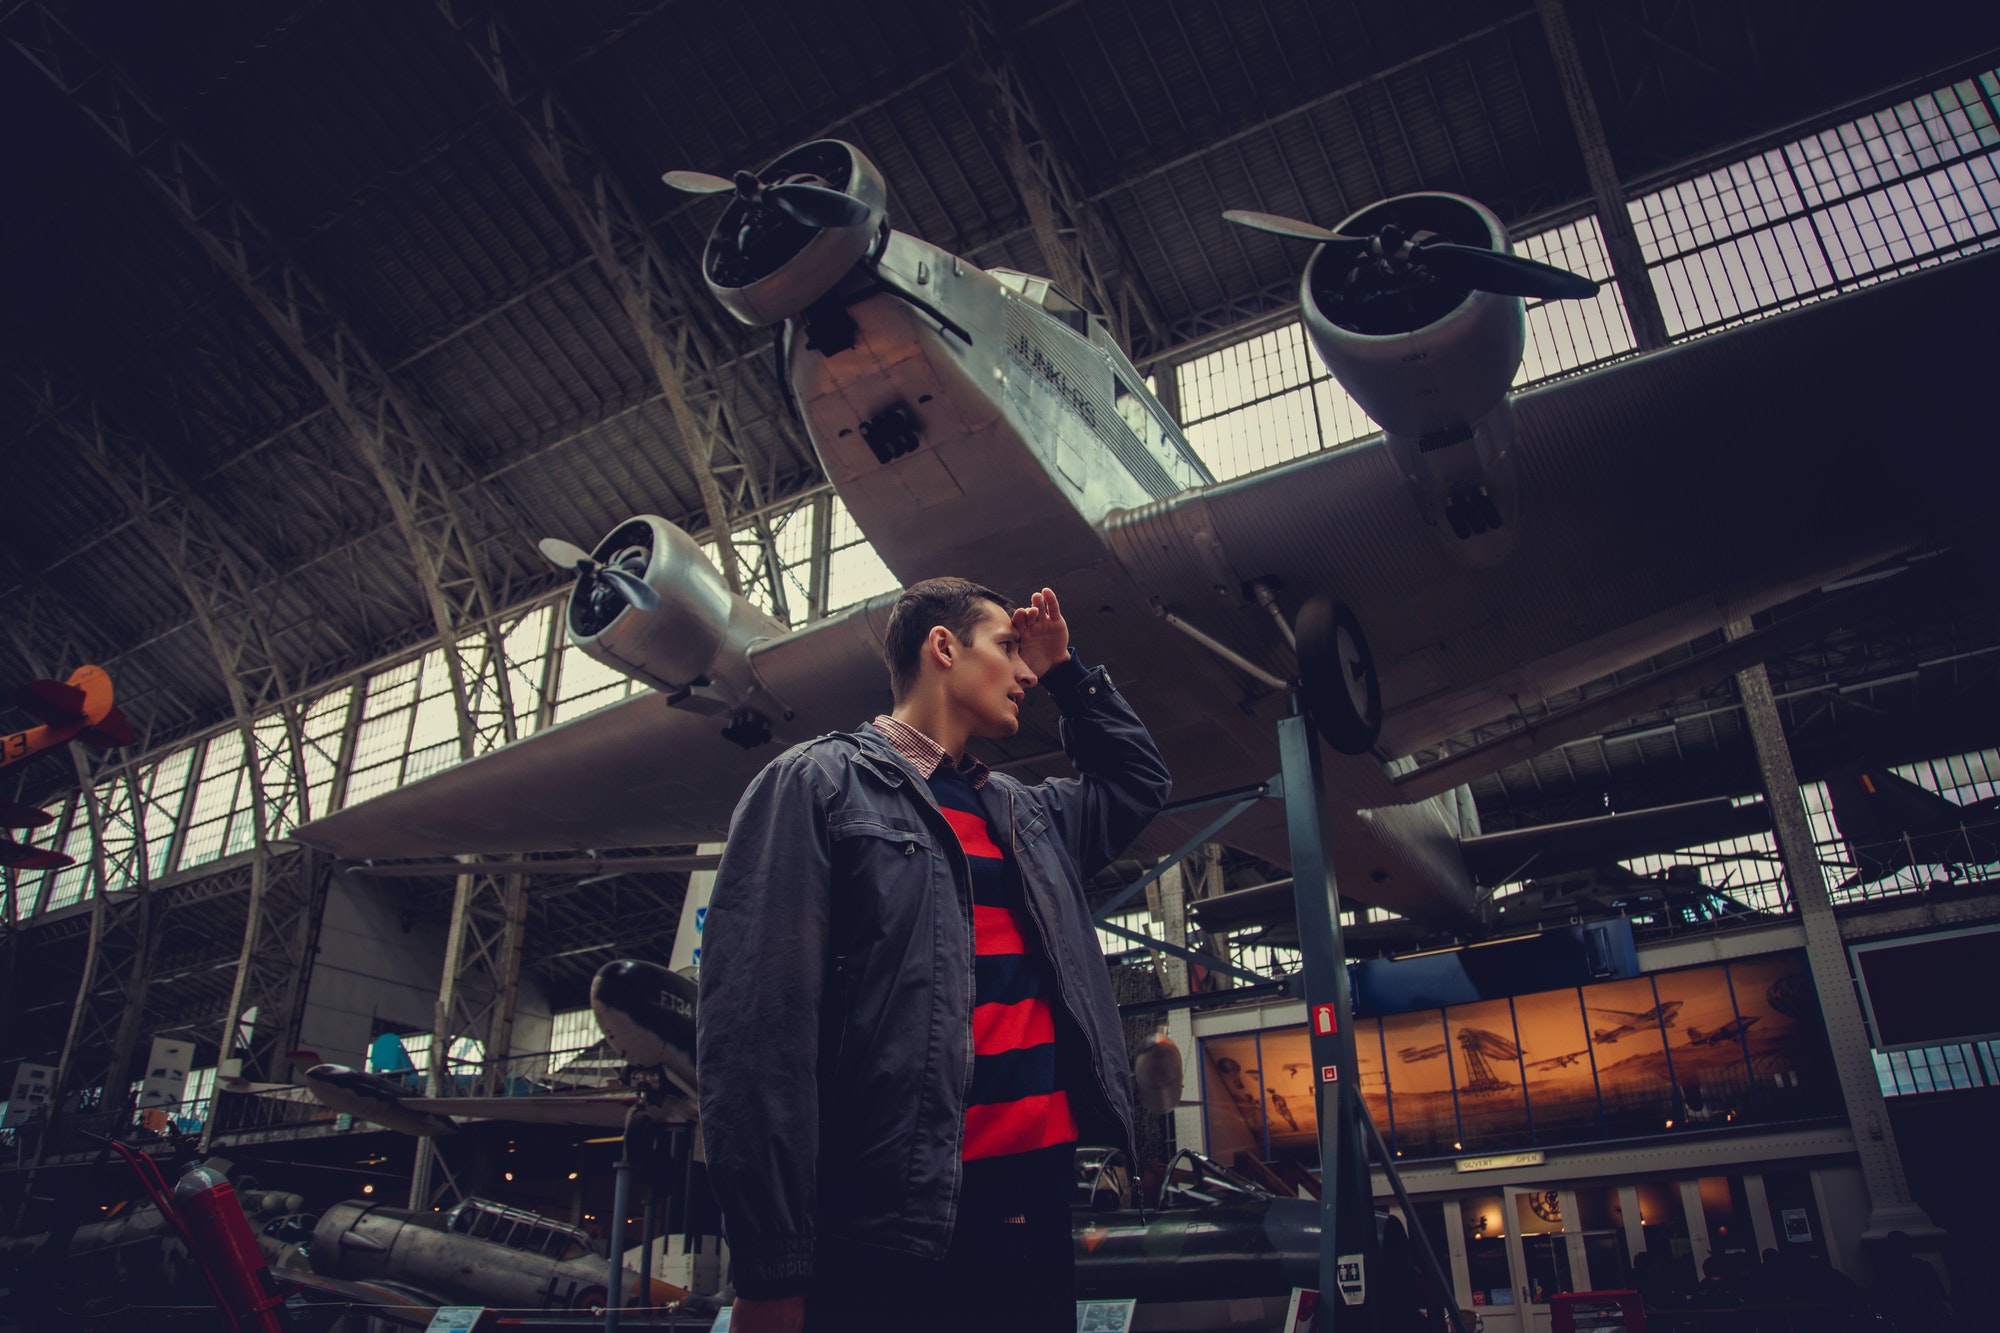 A man in airplanes museum.